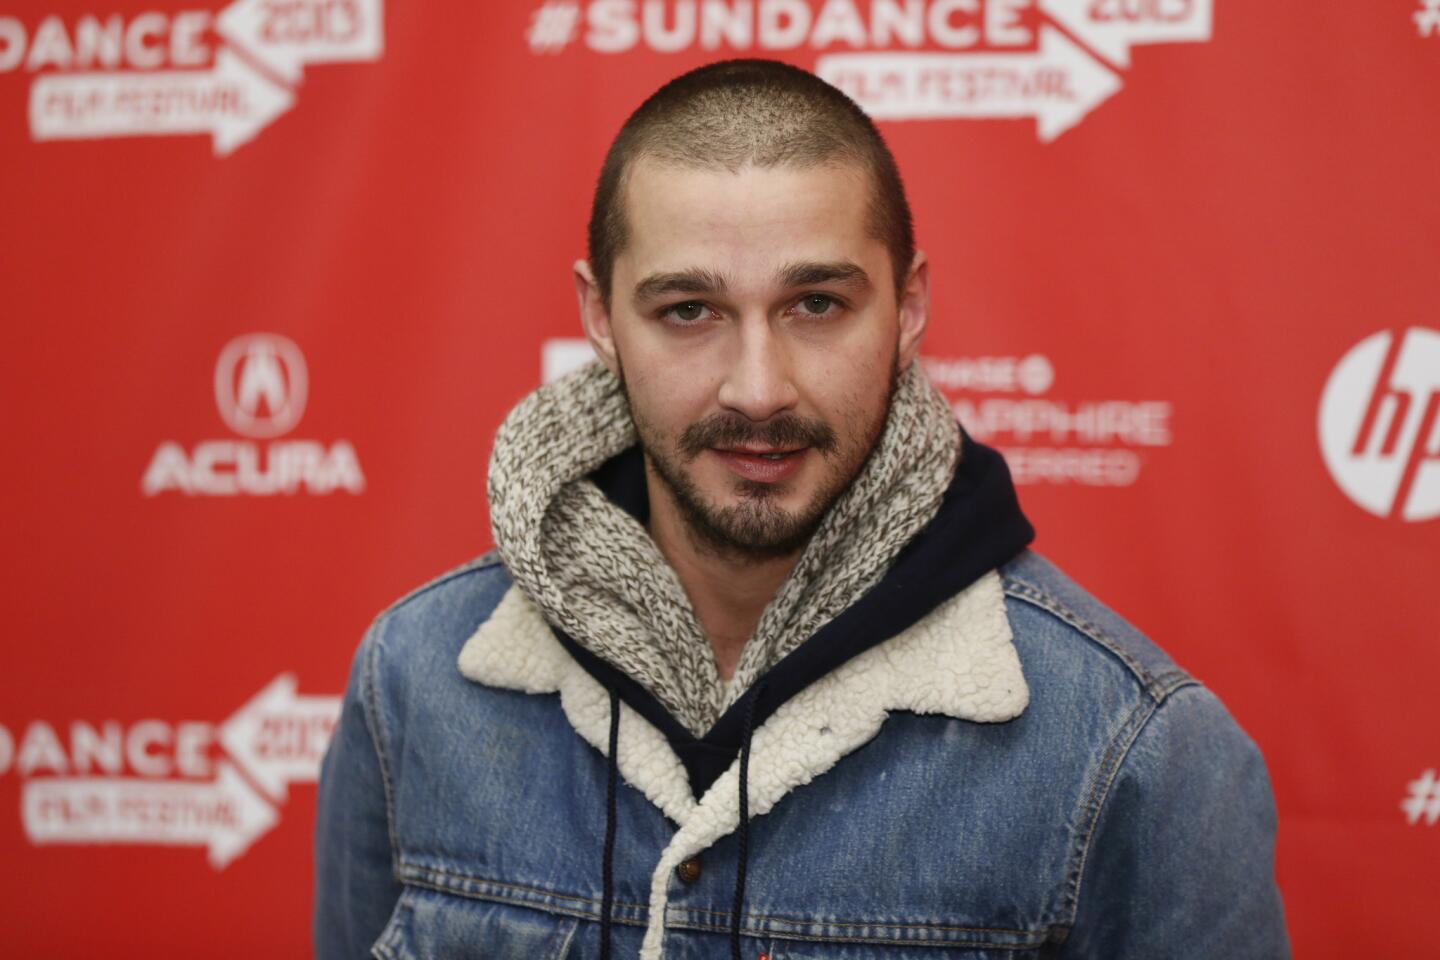 Shia LaBeouf's acid trip was all in a day's work